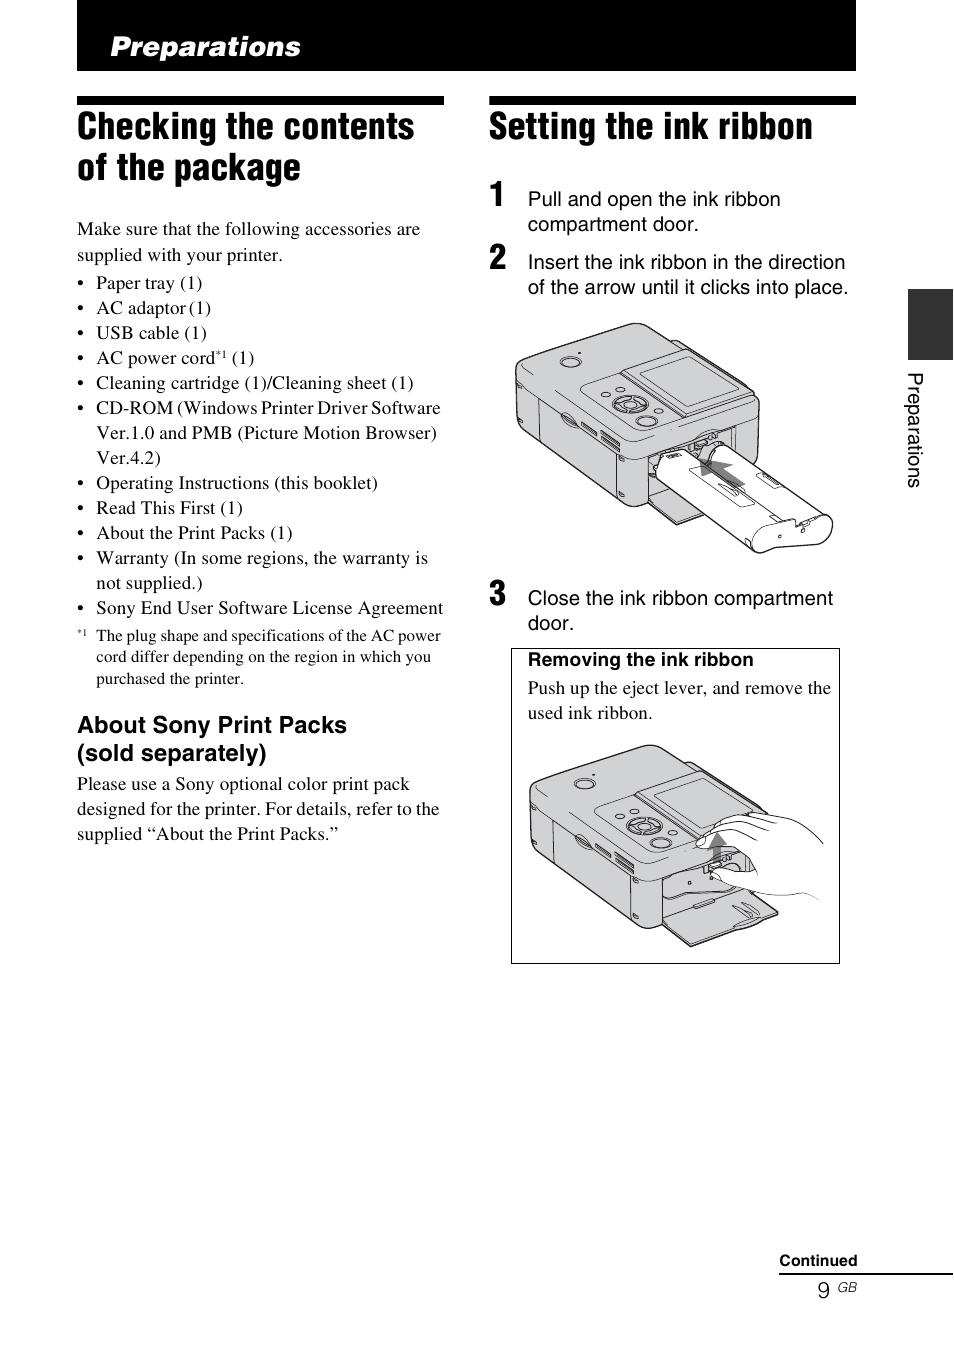 Preparations, Checking the contents of the package, Setting the ink ribbon | Sony DPP-FP77 User Manual | Page 9 / 72